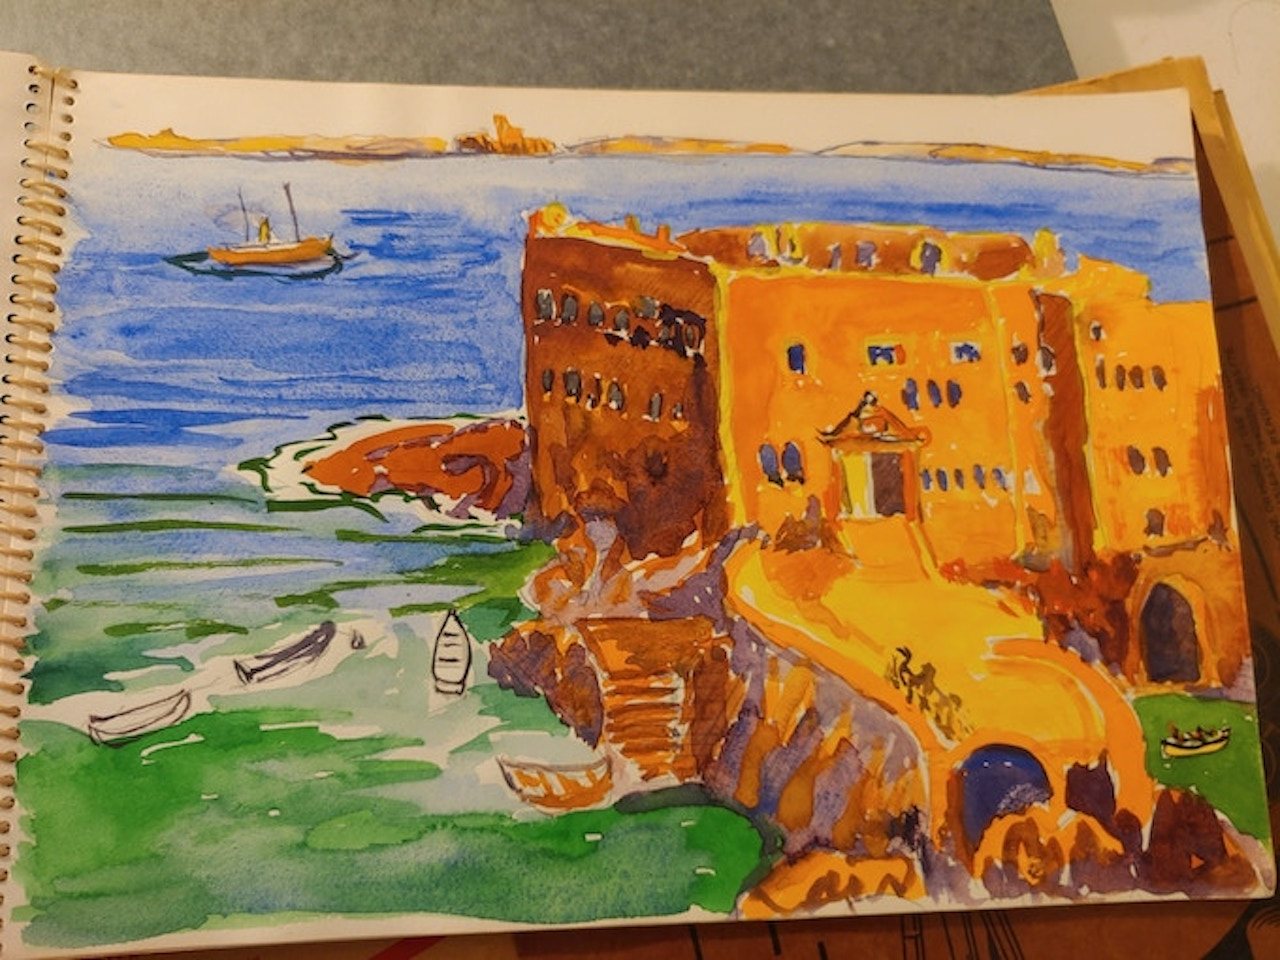 Painting of Fort of the Berlengas by John Dos Passos. The Dos Passos family has maintained a strong relationship with Portugal and Madeira for generations